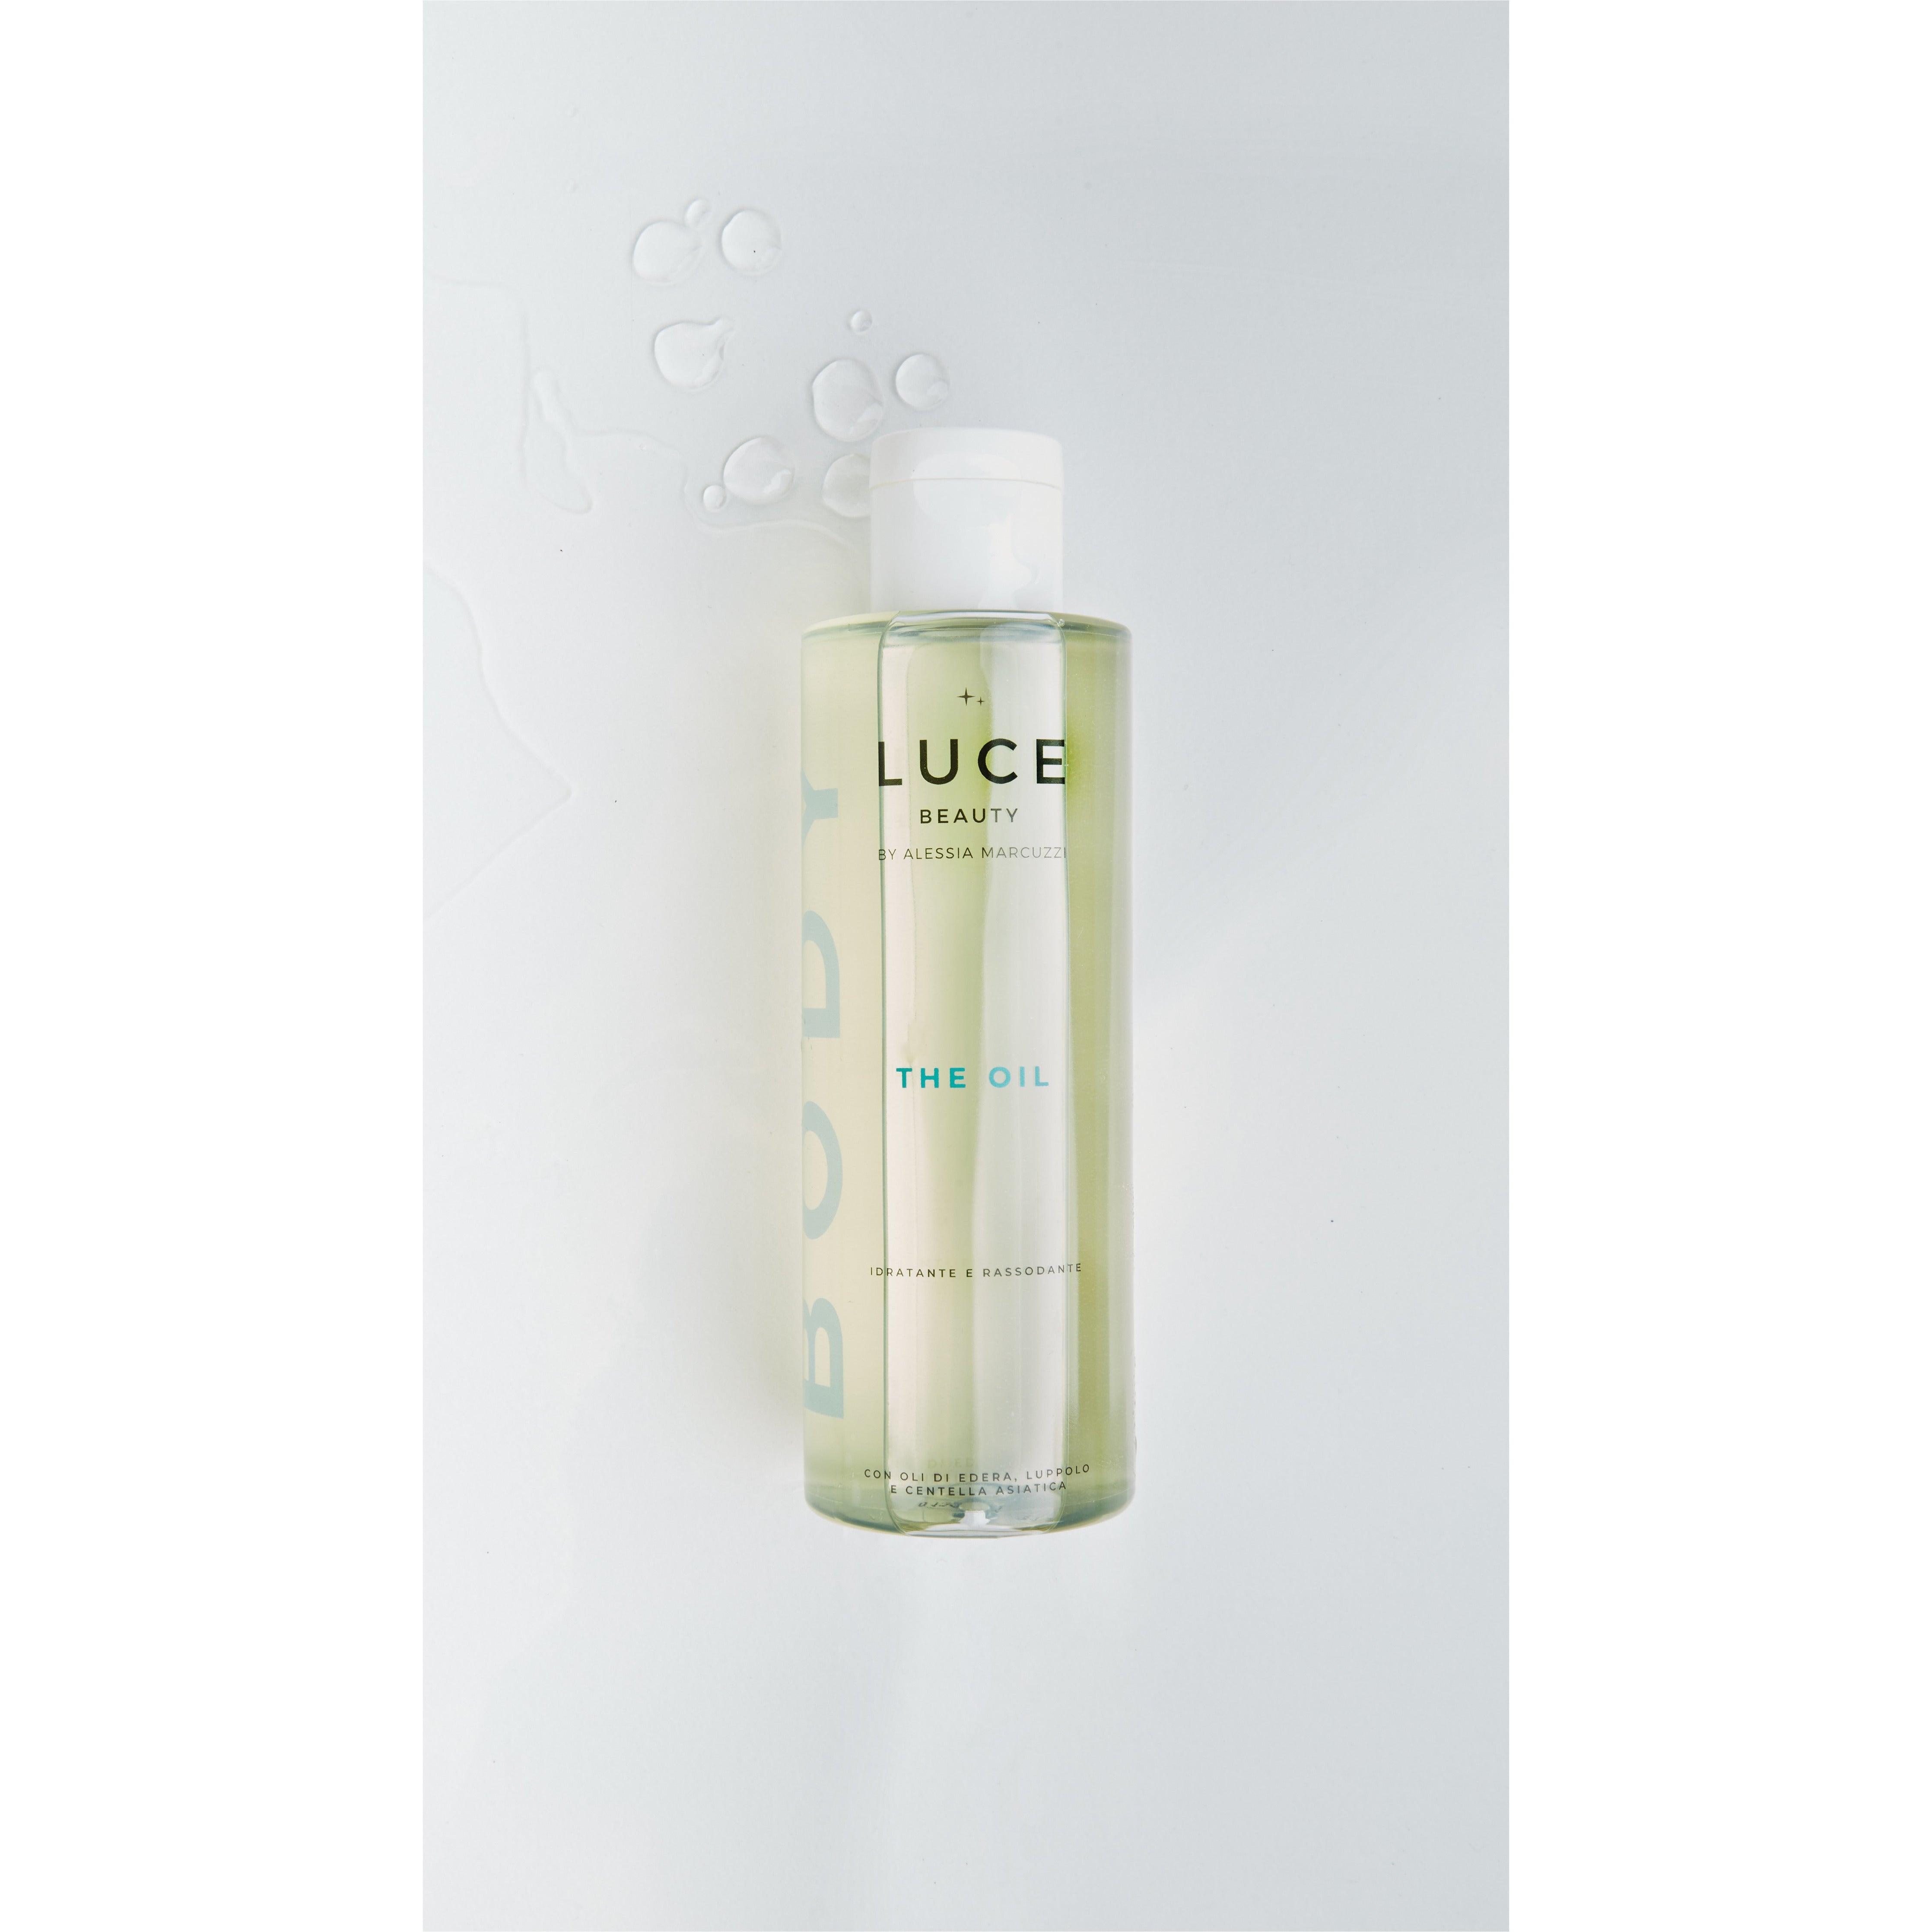 The Oil - Texture - Luce Beauty by Alessia Marcuzzi